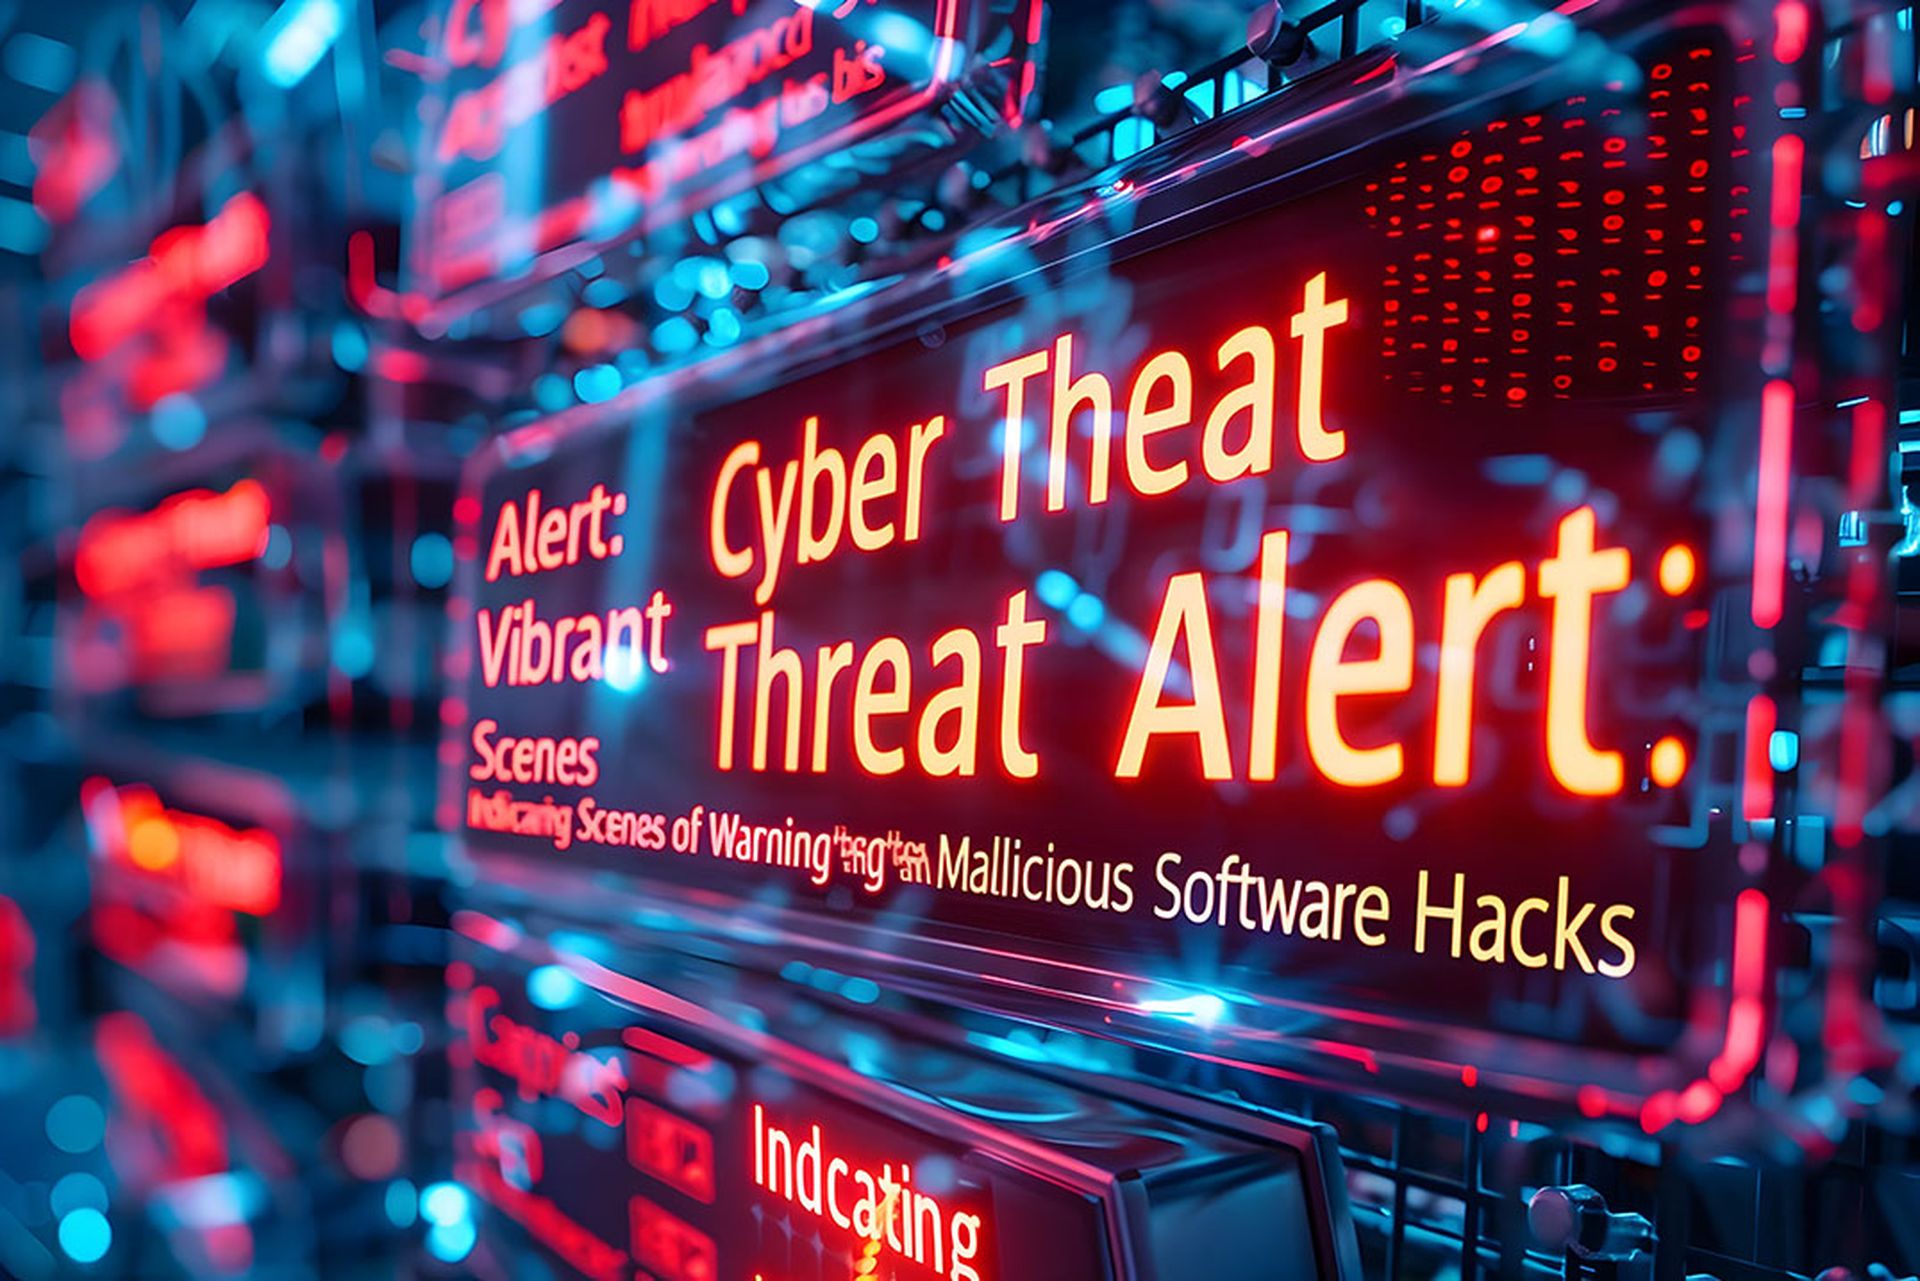 A dramatic digital display showing a 'Cyber Threat Alert' warning,with vibrant neon-colored scenes and caution messages indicating the presence of malicious software,hacks,and other digital threats